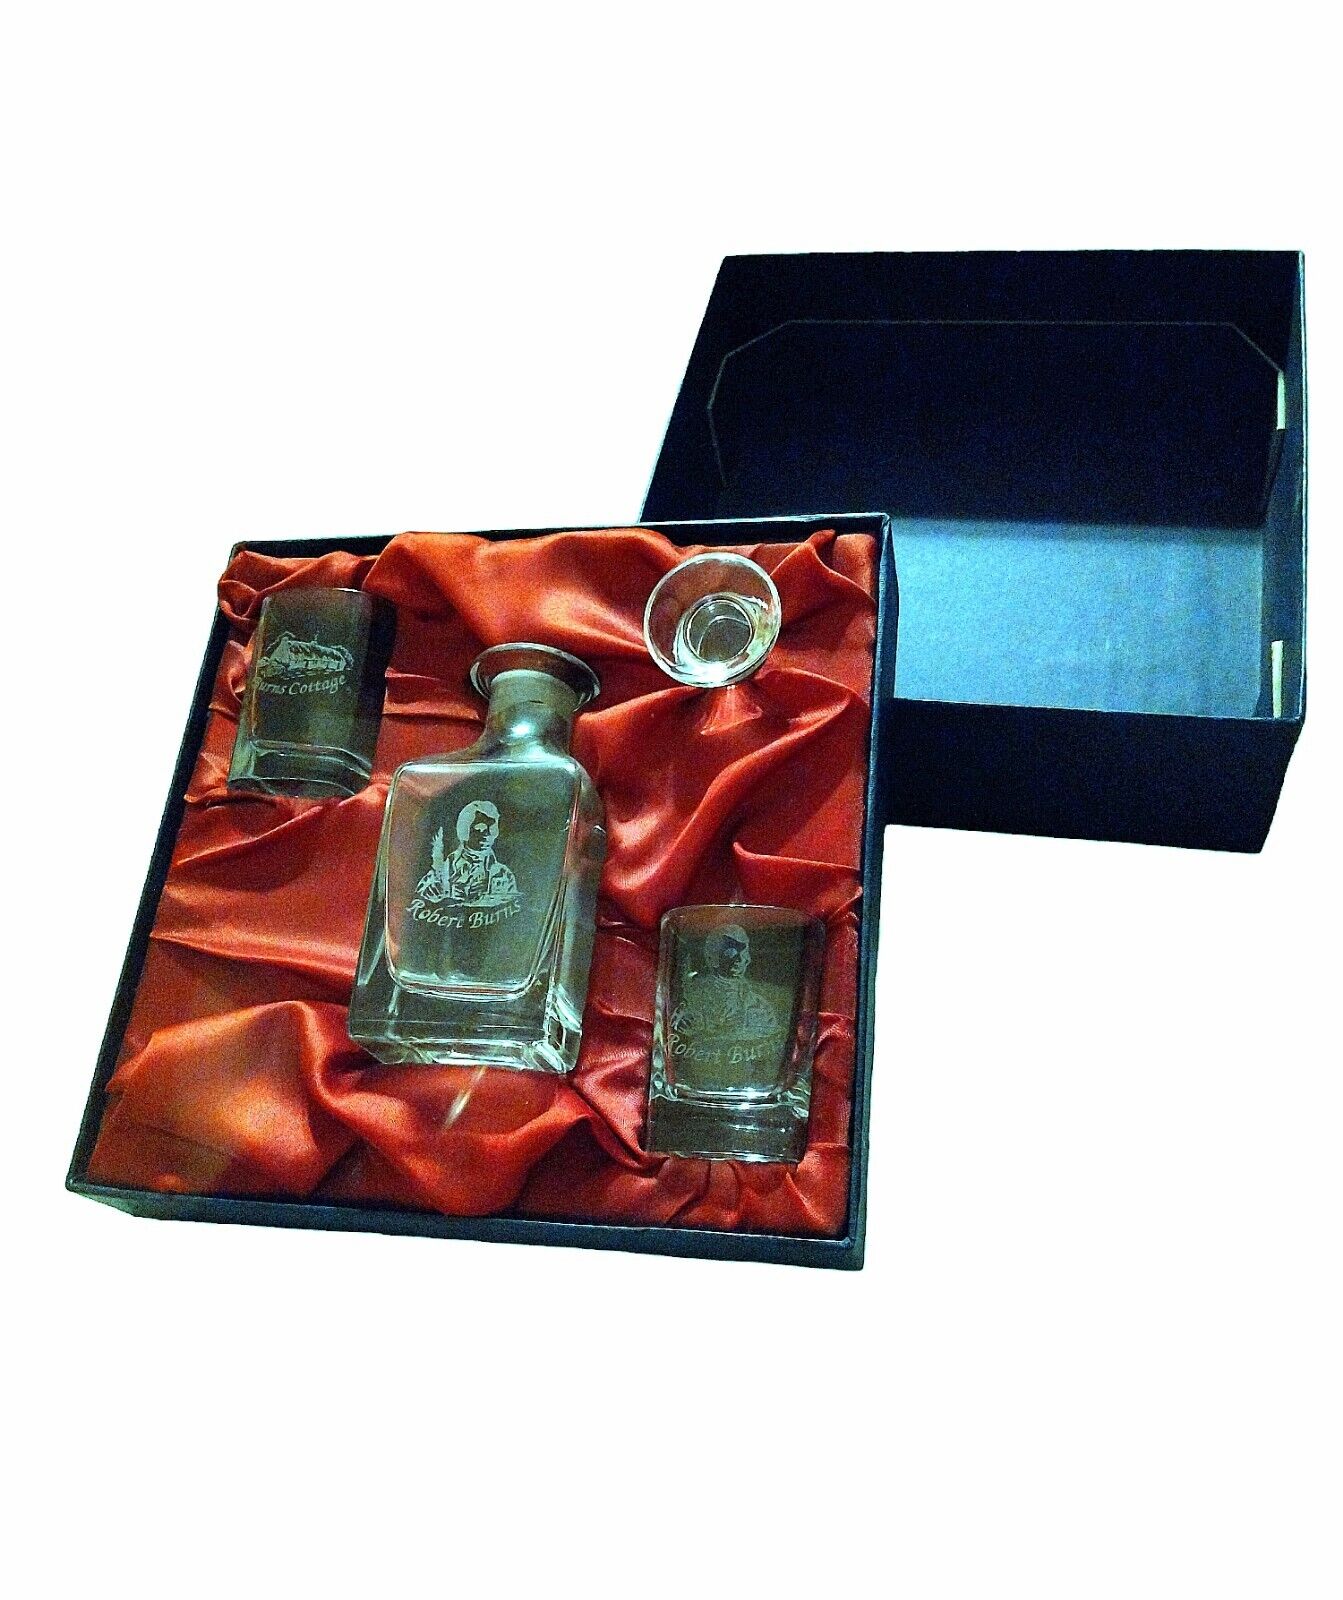 Robert Burns Whisky Decanter With Shot Glasses Etched Design Gift Box